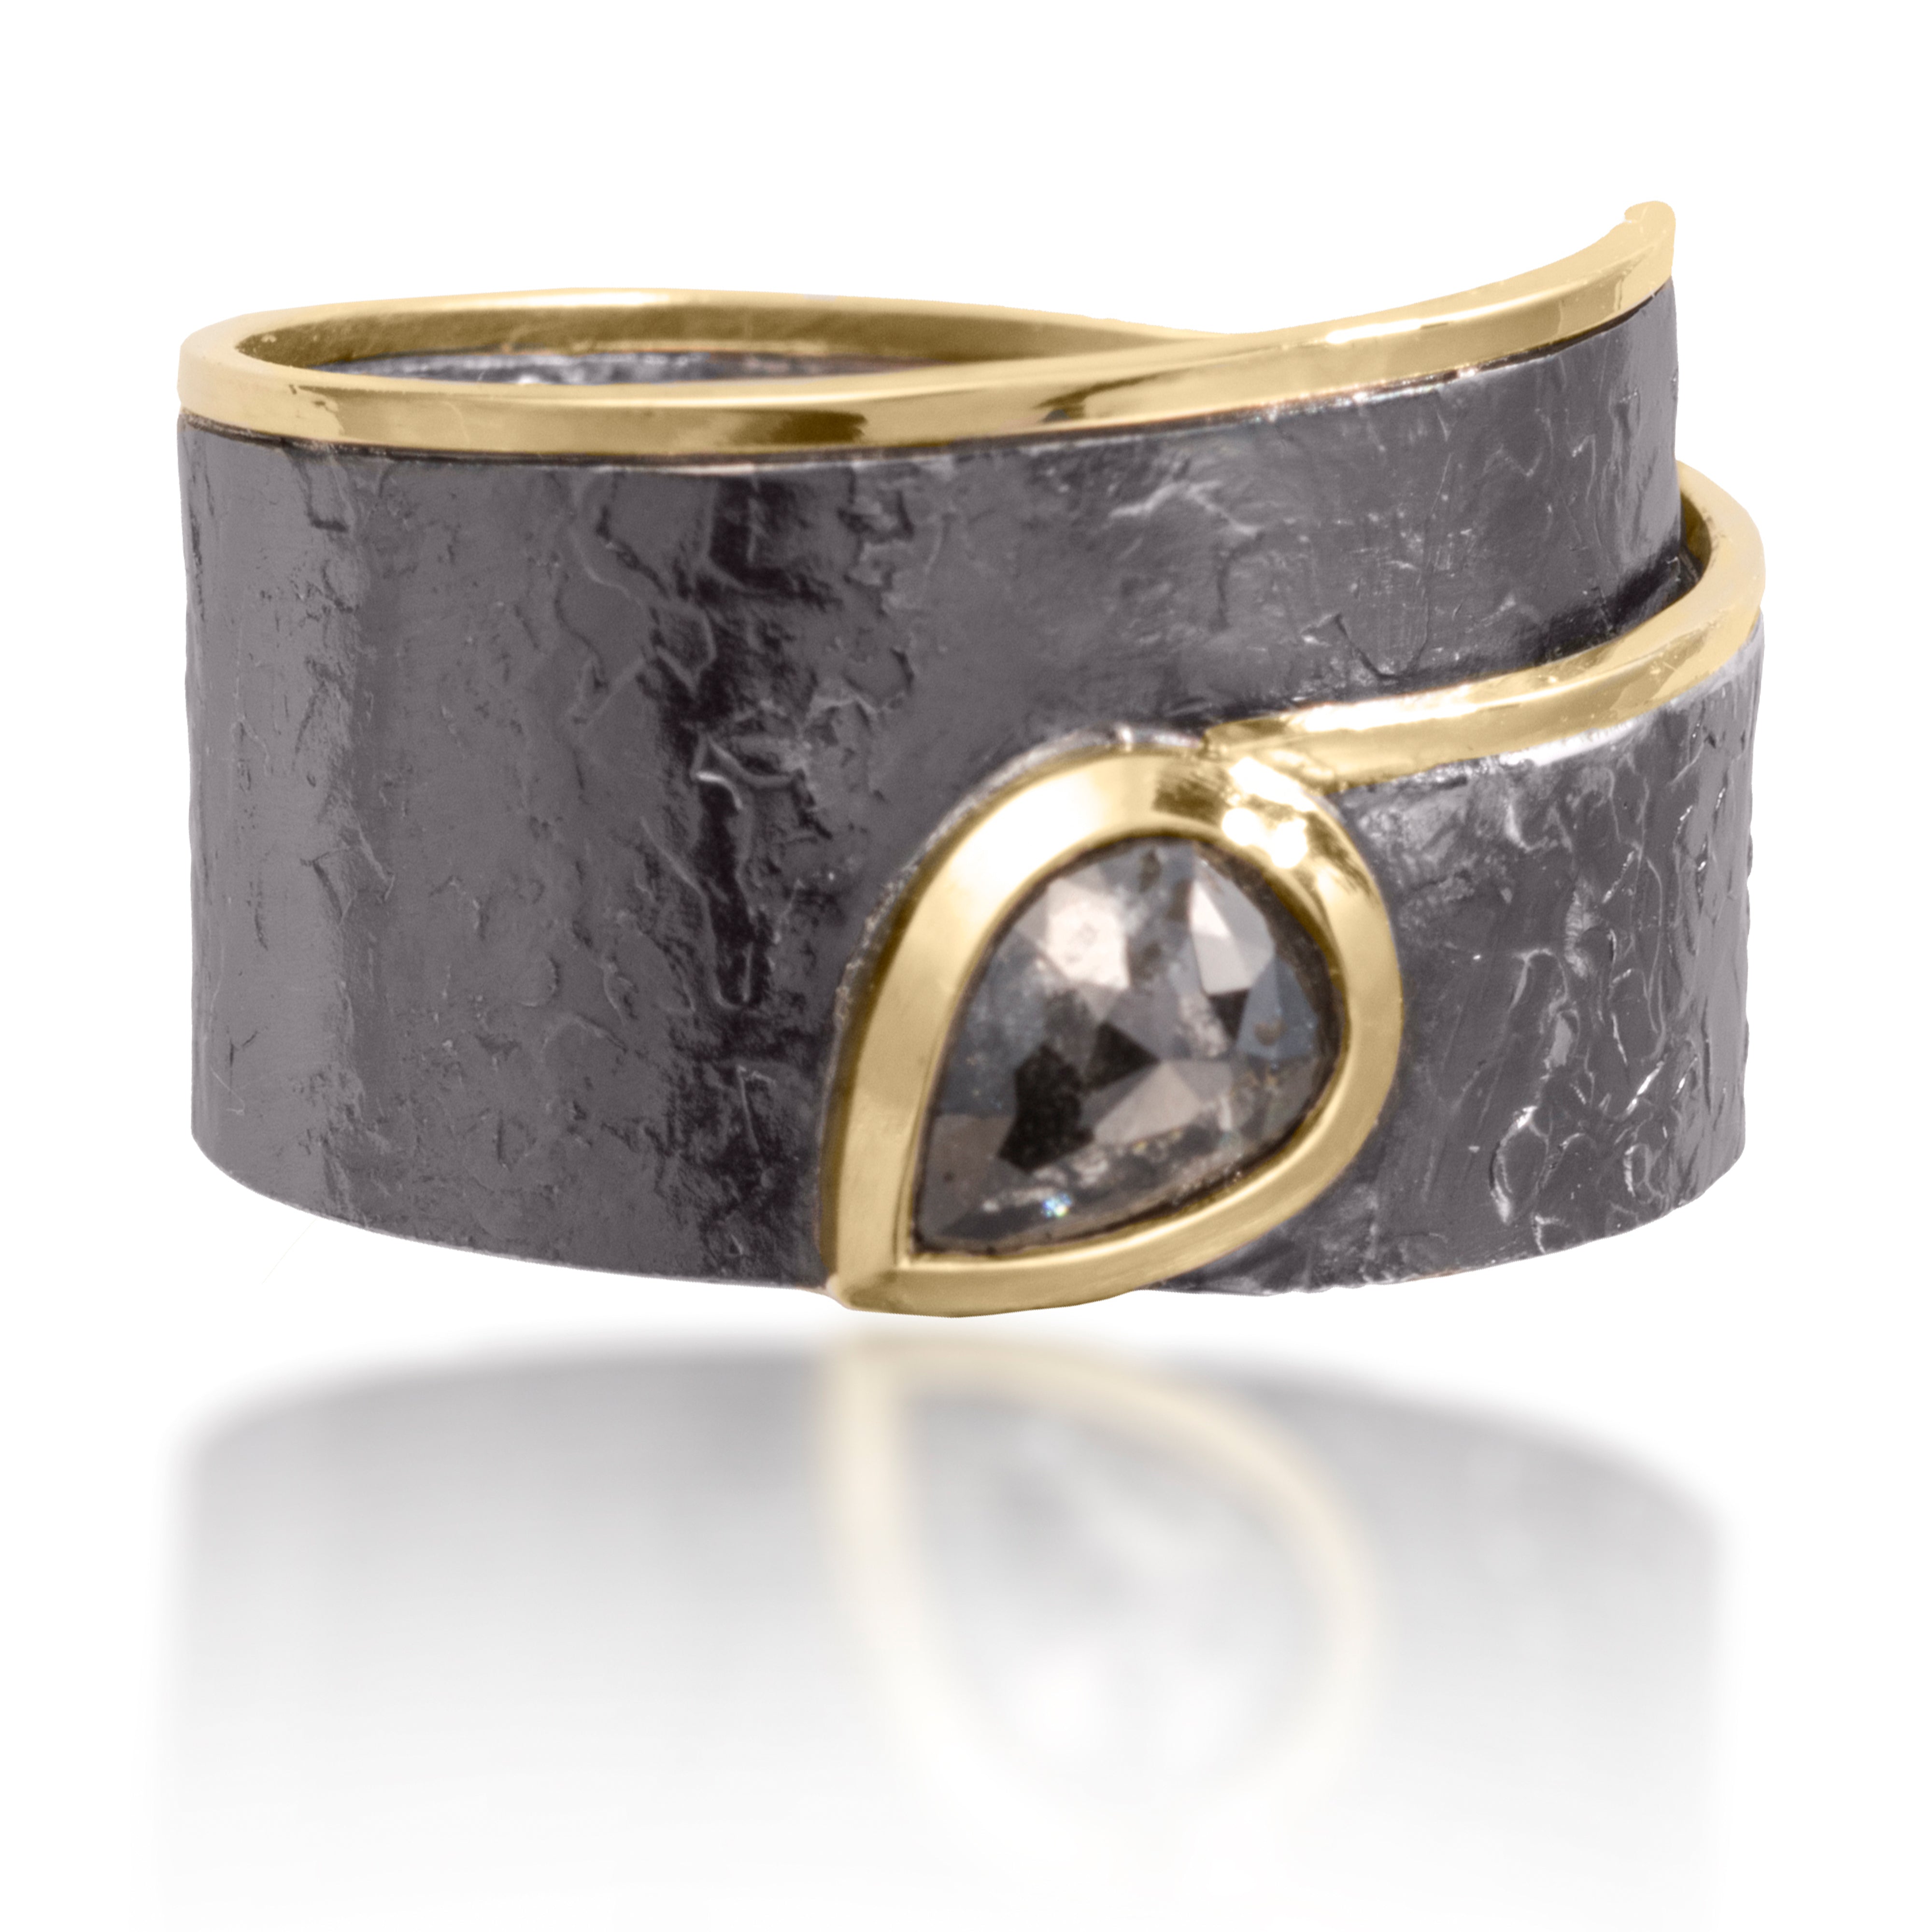 This simple, yet distinctive ring in 18k gold and oxidized silver features a bezel set center tear drop, rustic diamond. It is hand fabricated and hammer textured. Available in various widths and colors.